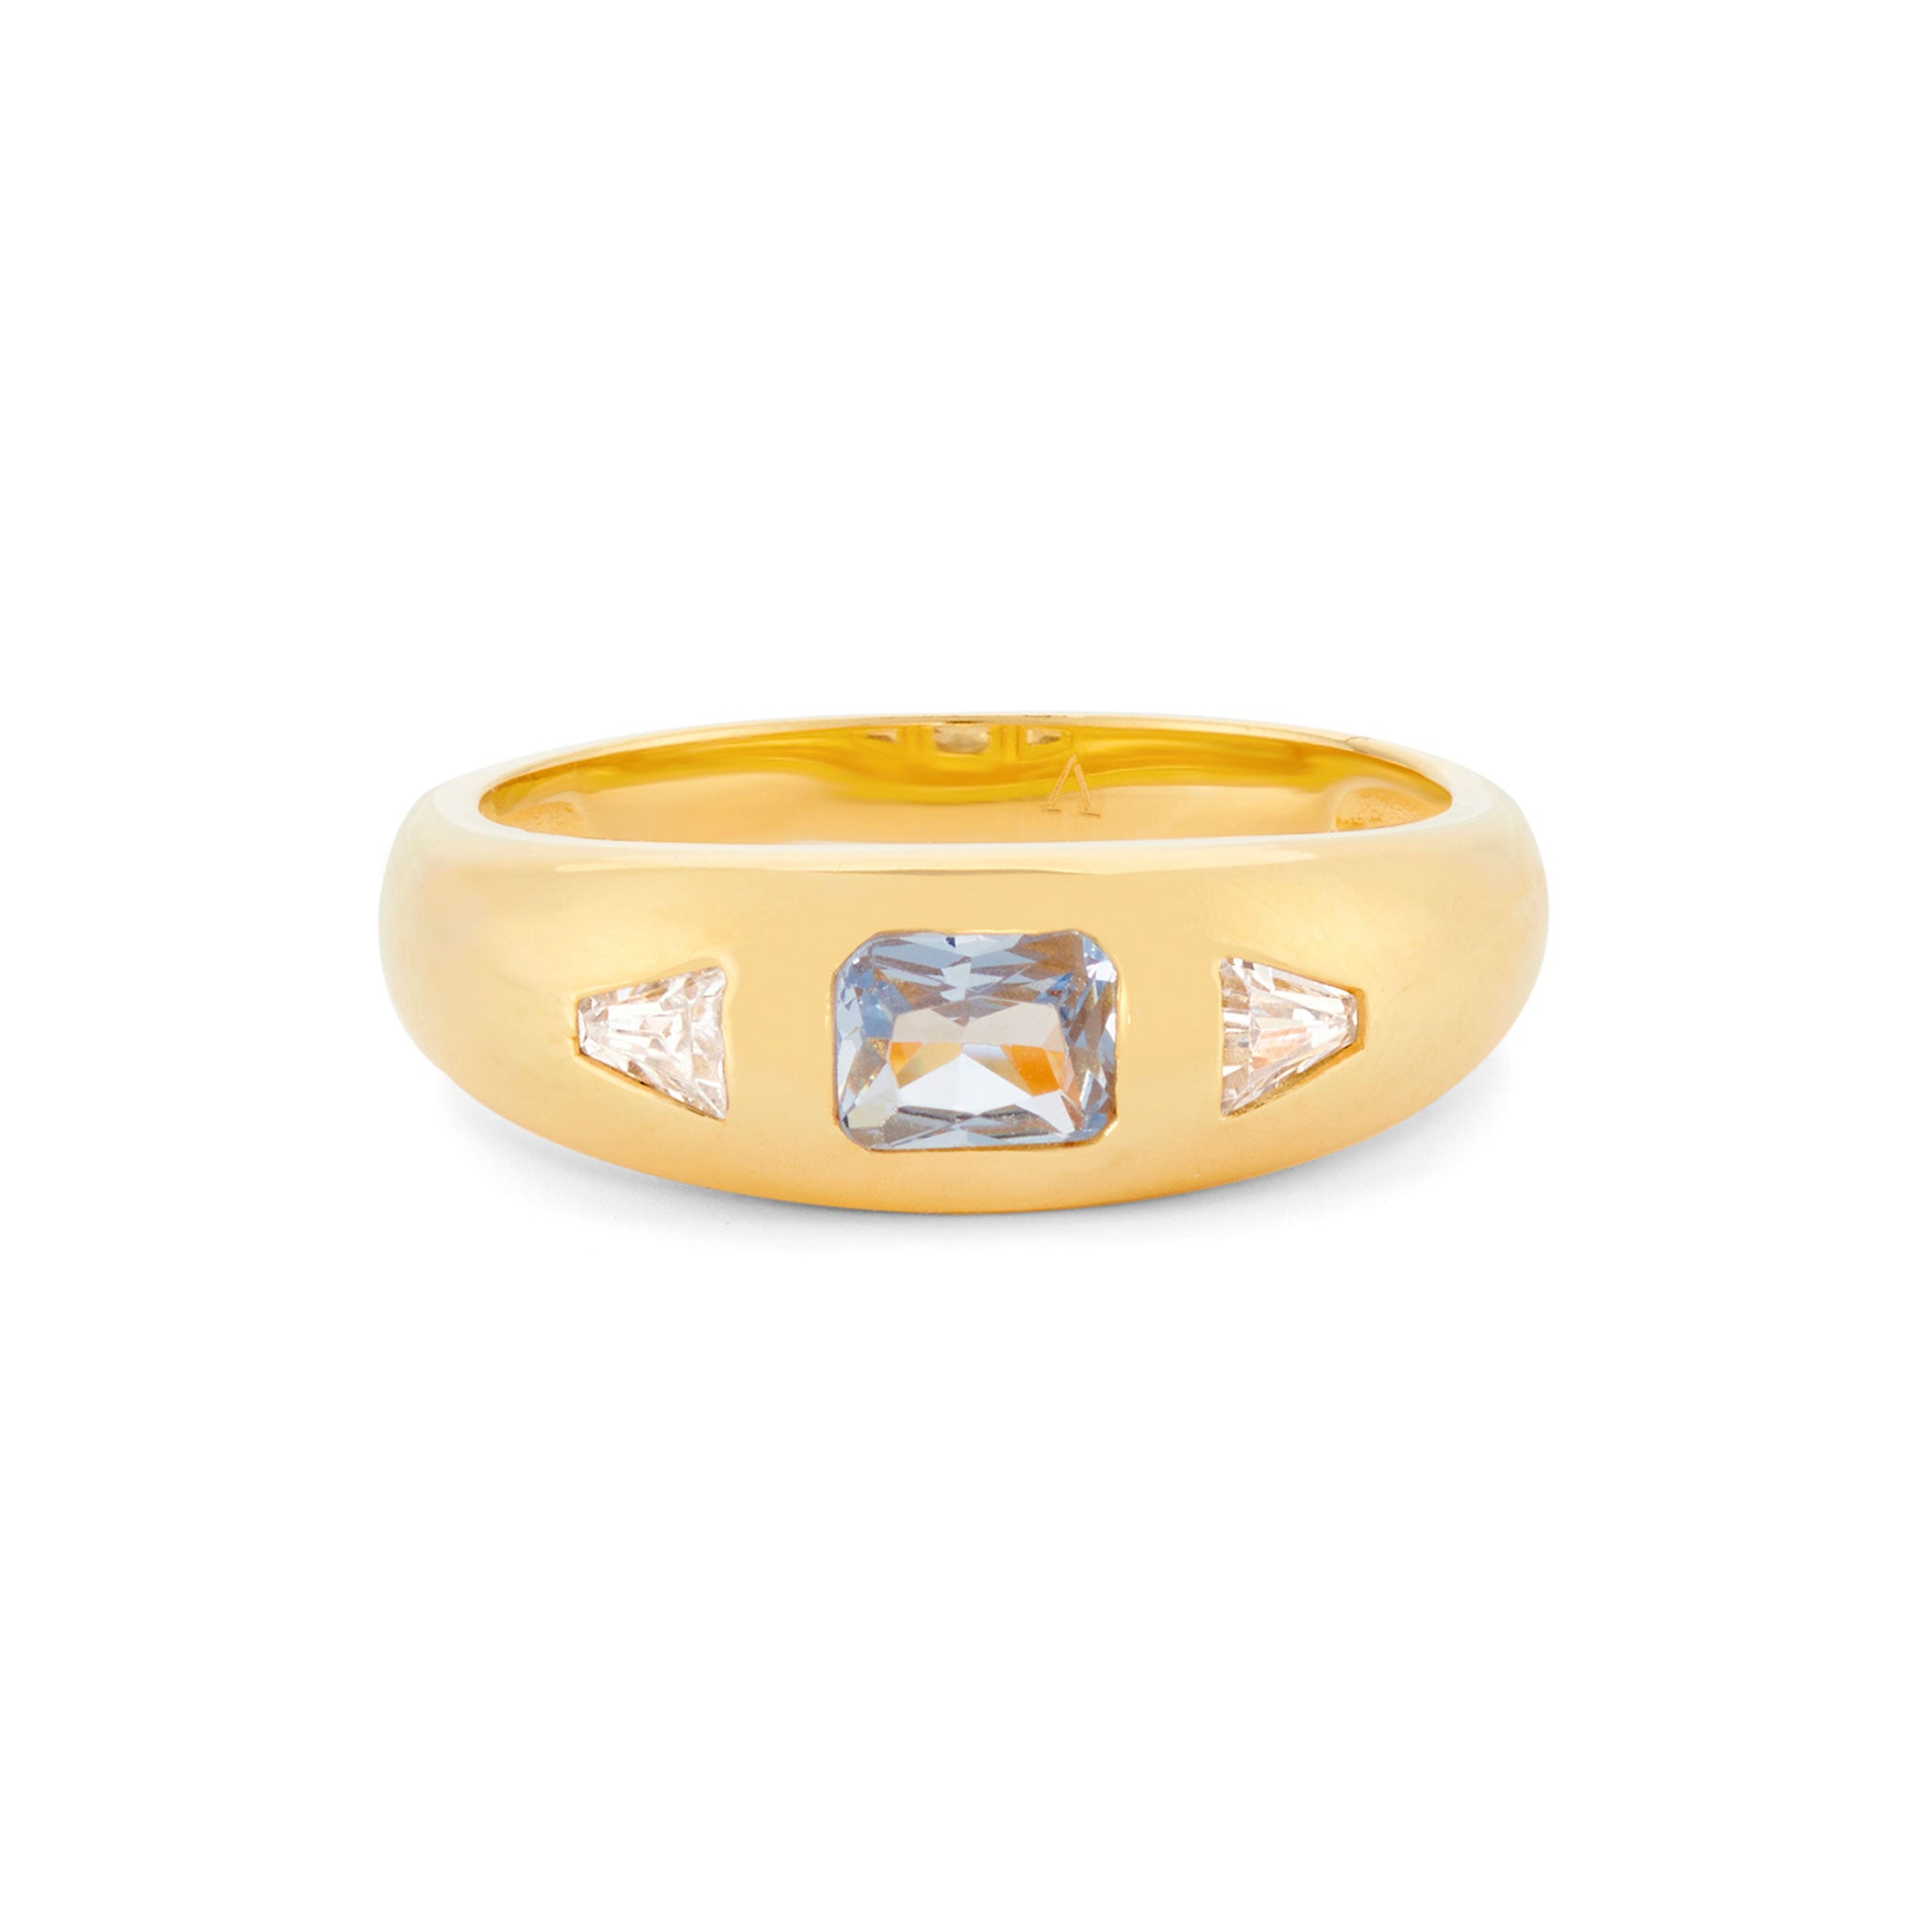 Diana Spinel Blue Stone Ring in Gold